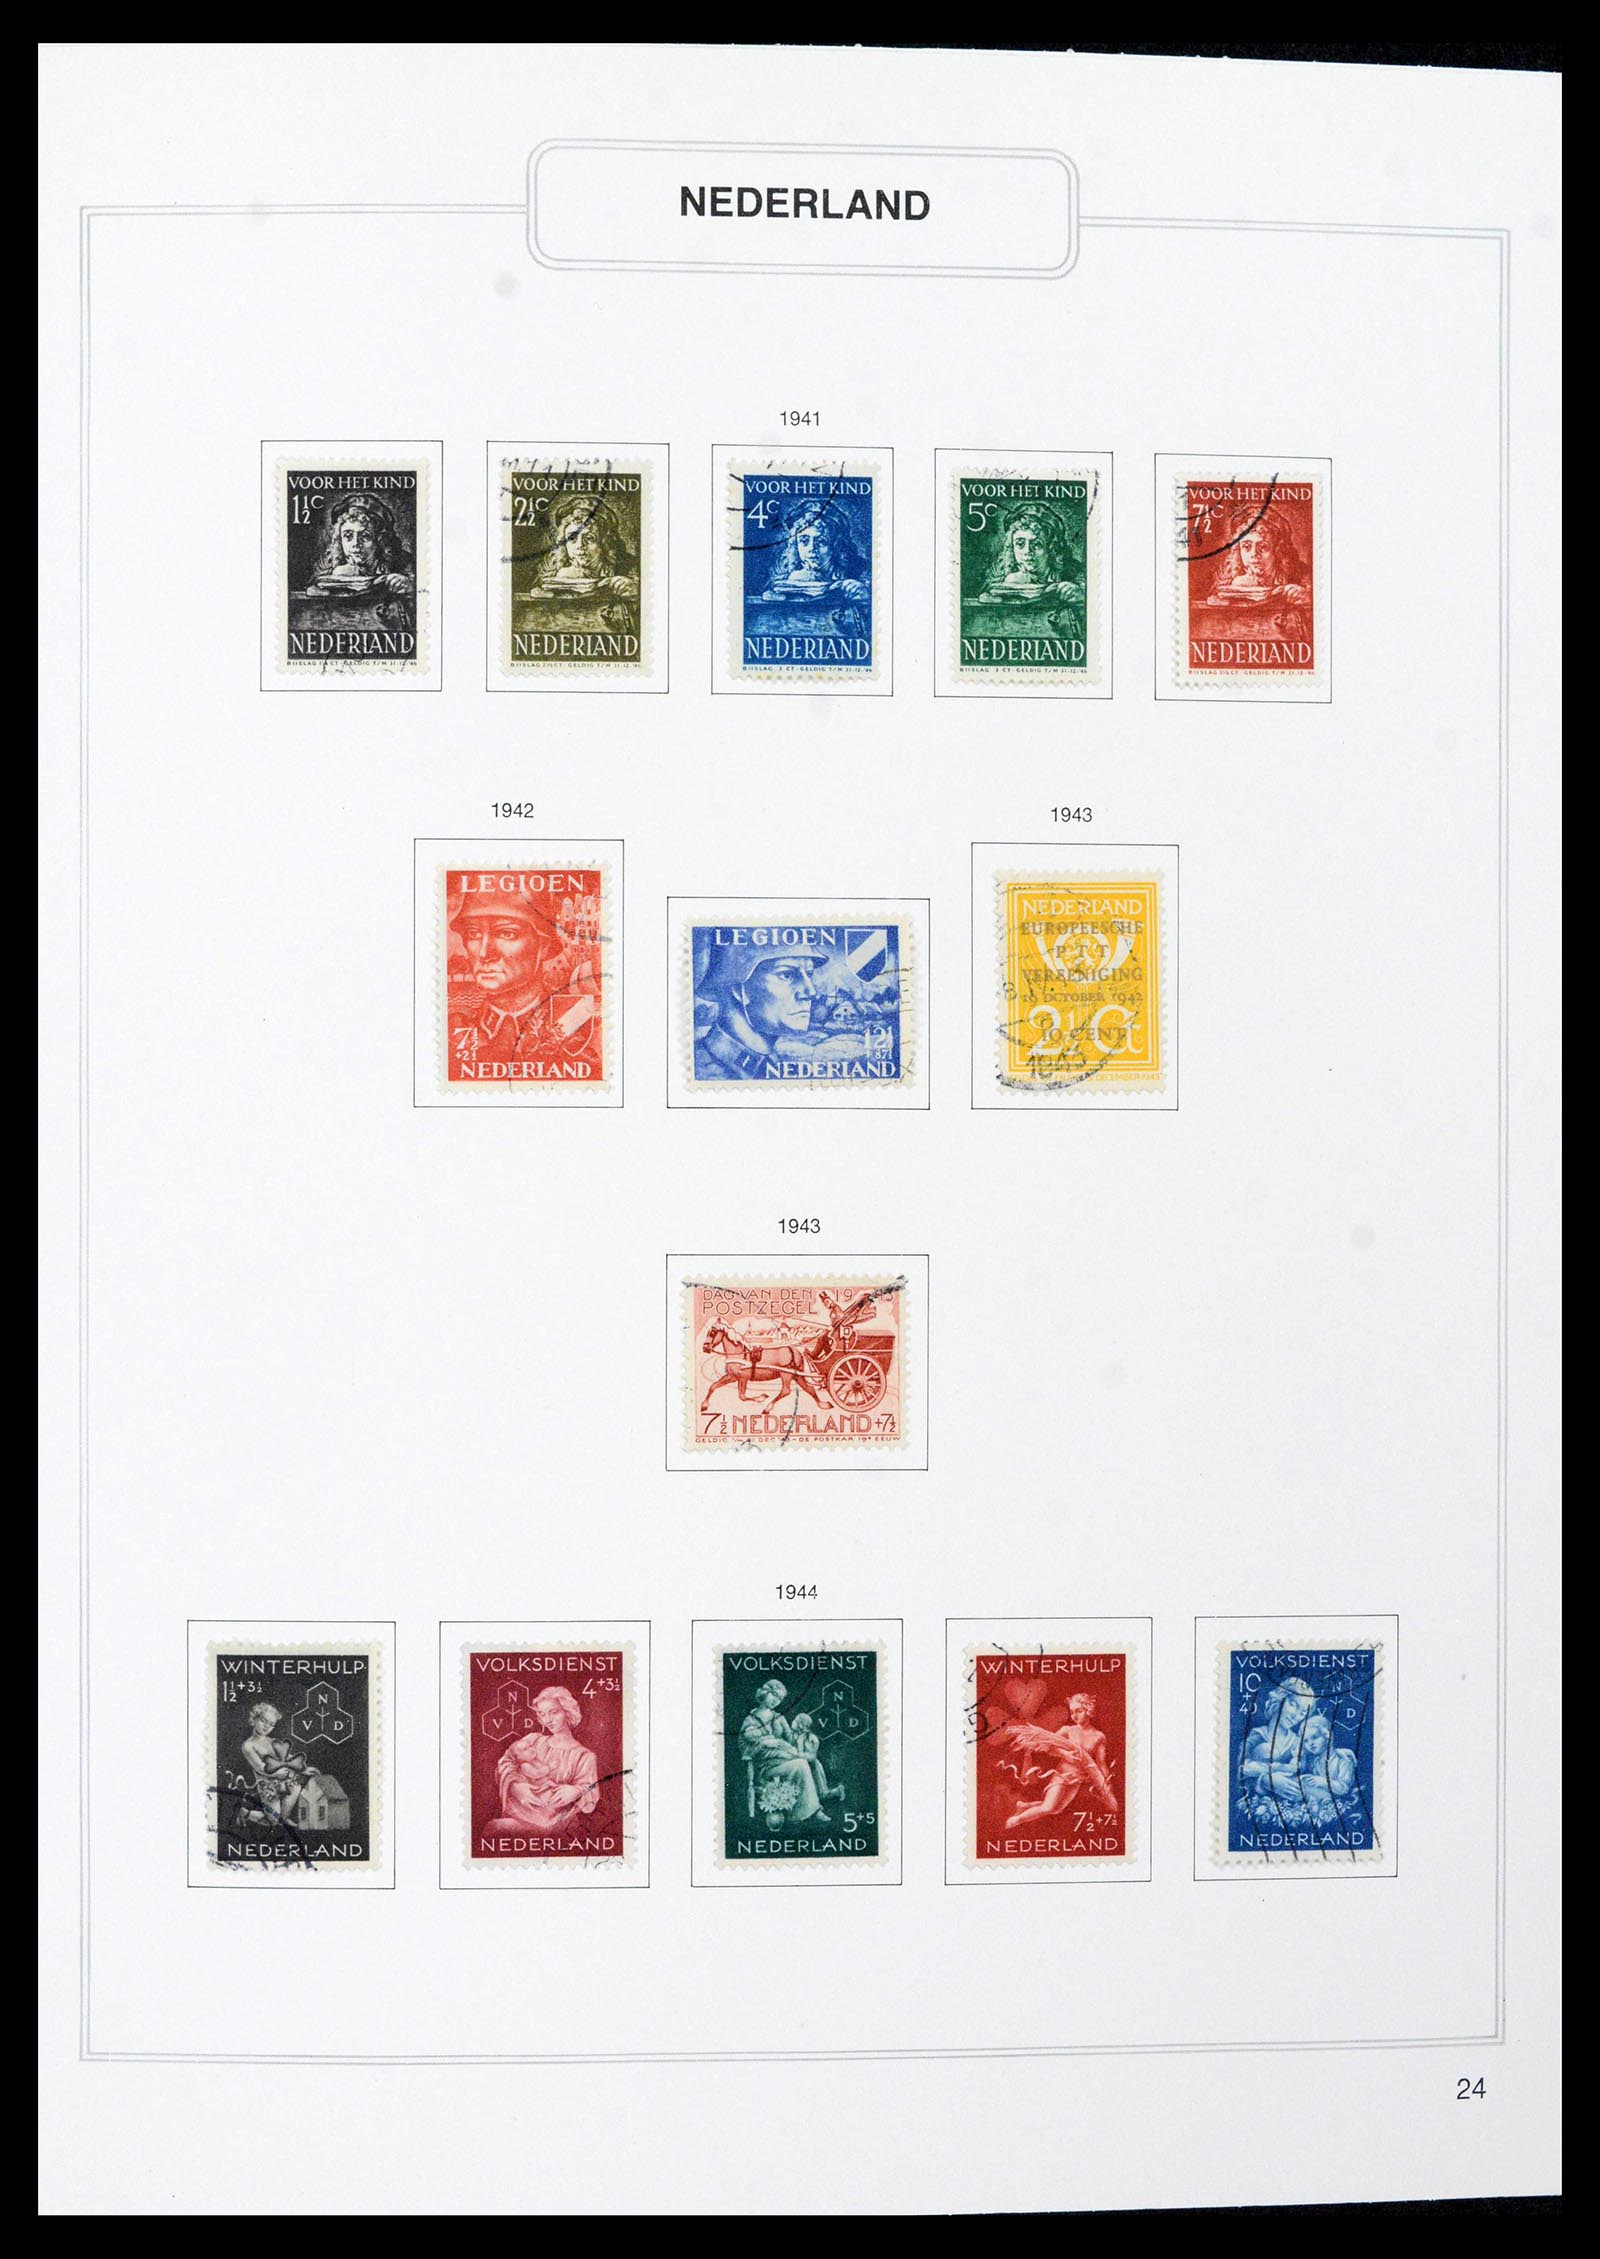 39261 0024 - Stamp collection 39261 Netherlands 1852-2015.